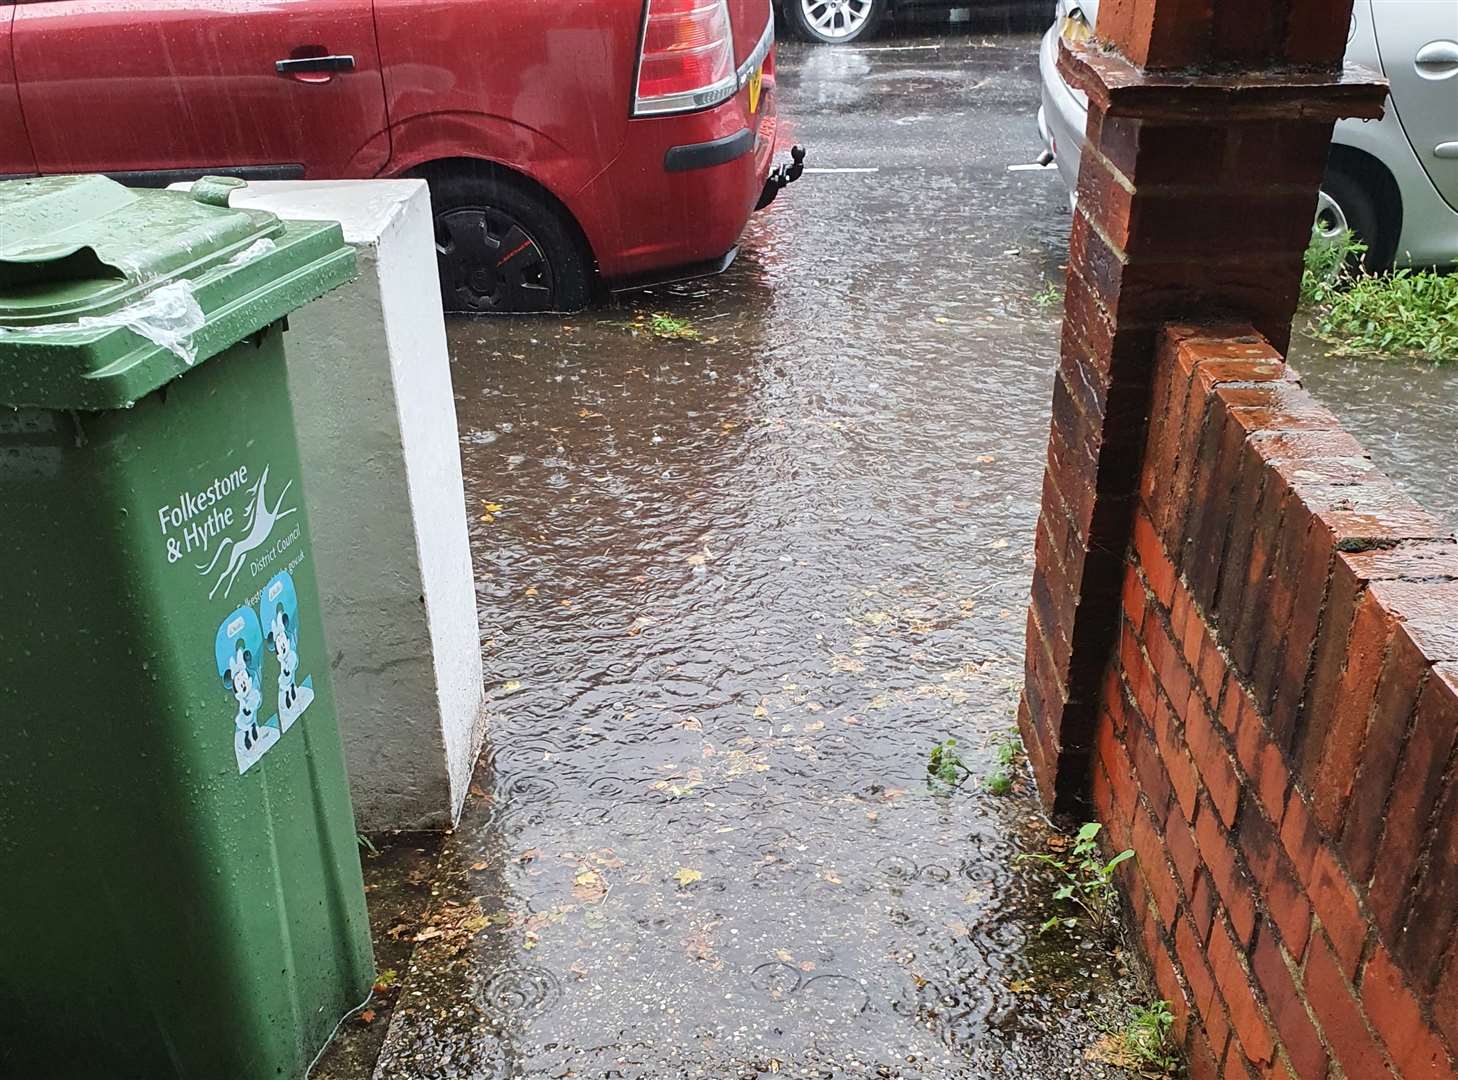 The flooding outside his house in Russell Road, Folkestone